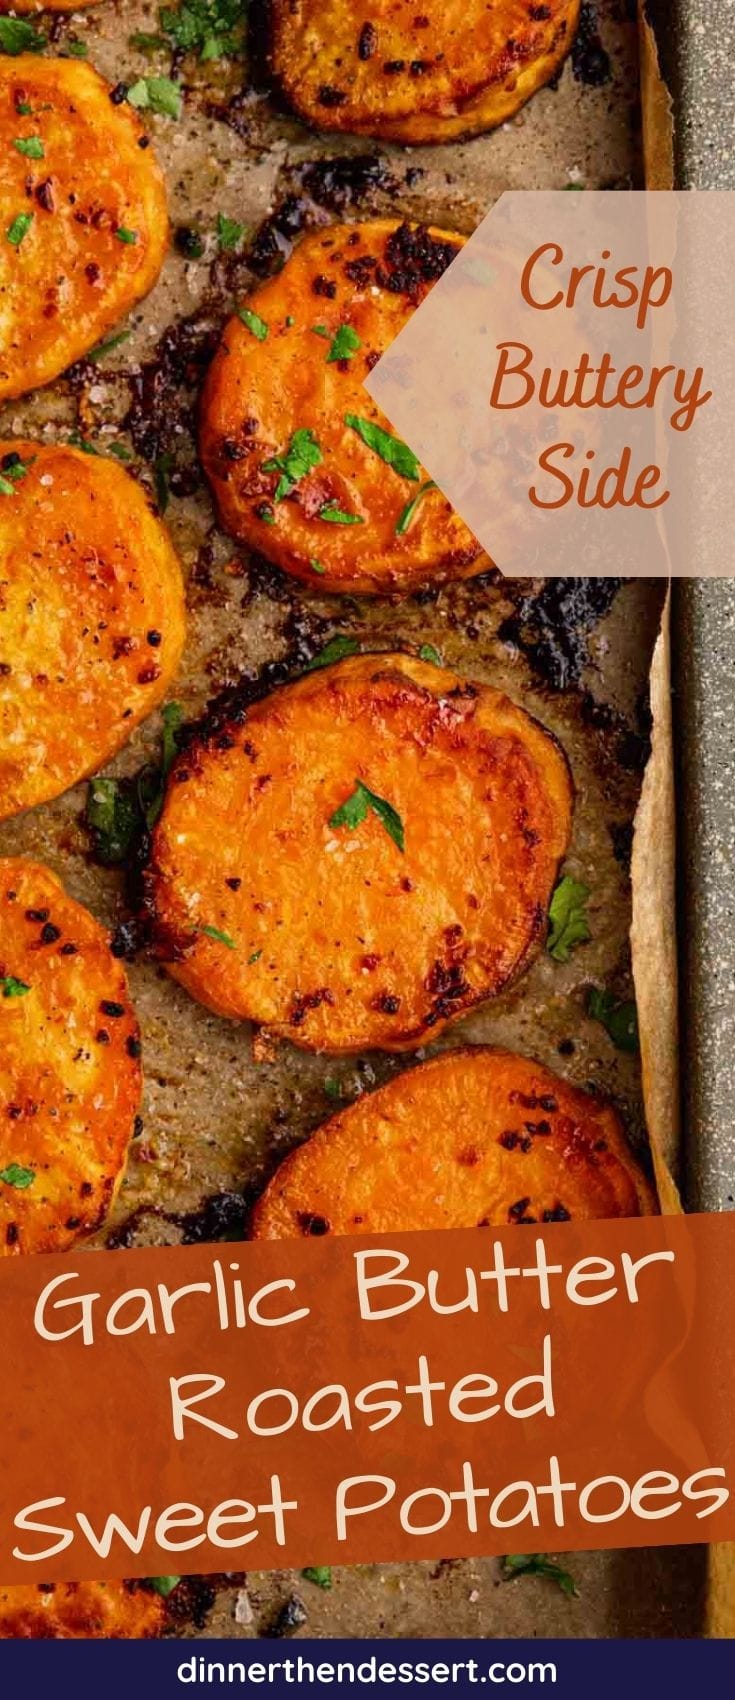 Garlic Butter Roasted Sweet Potatoes collage